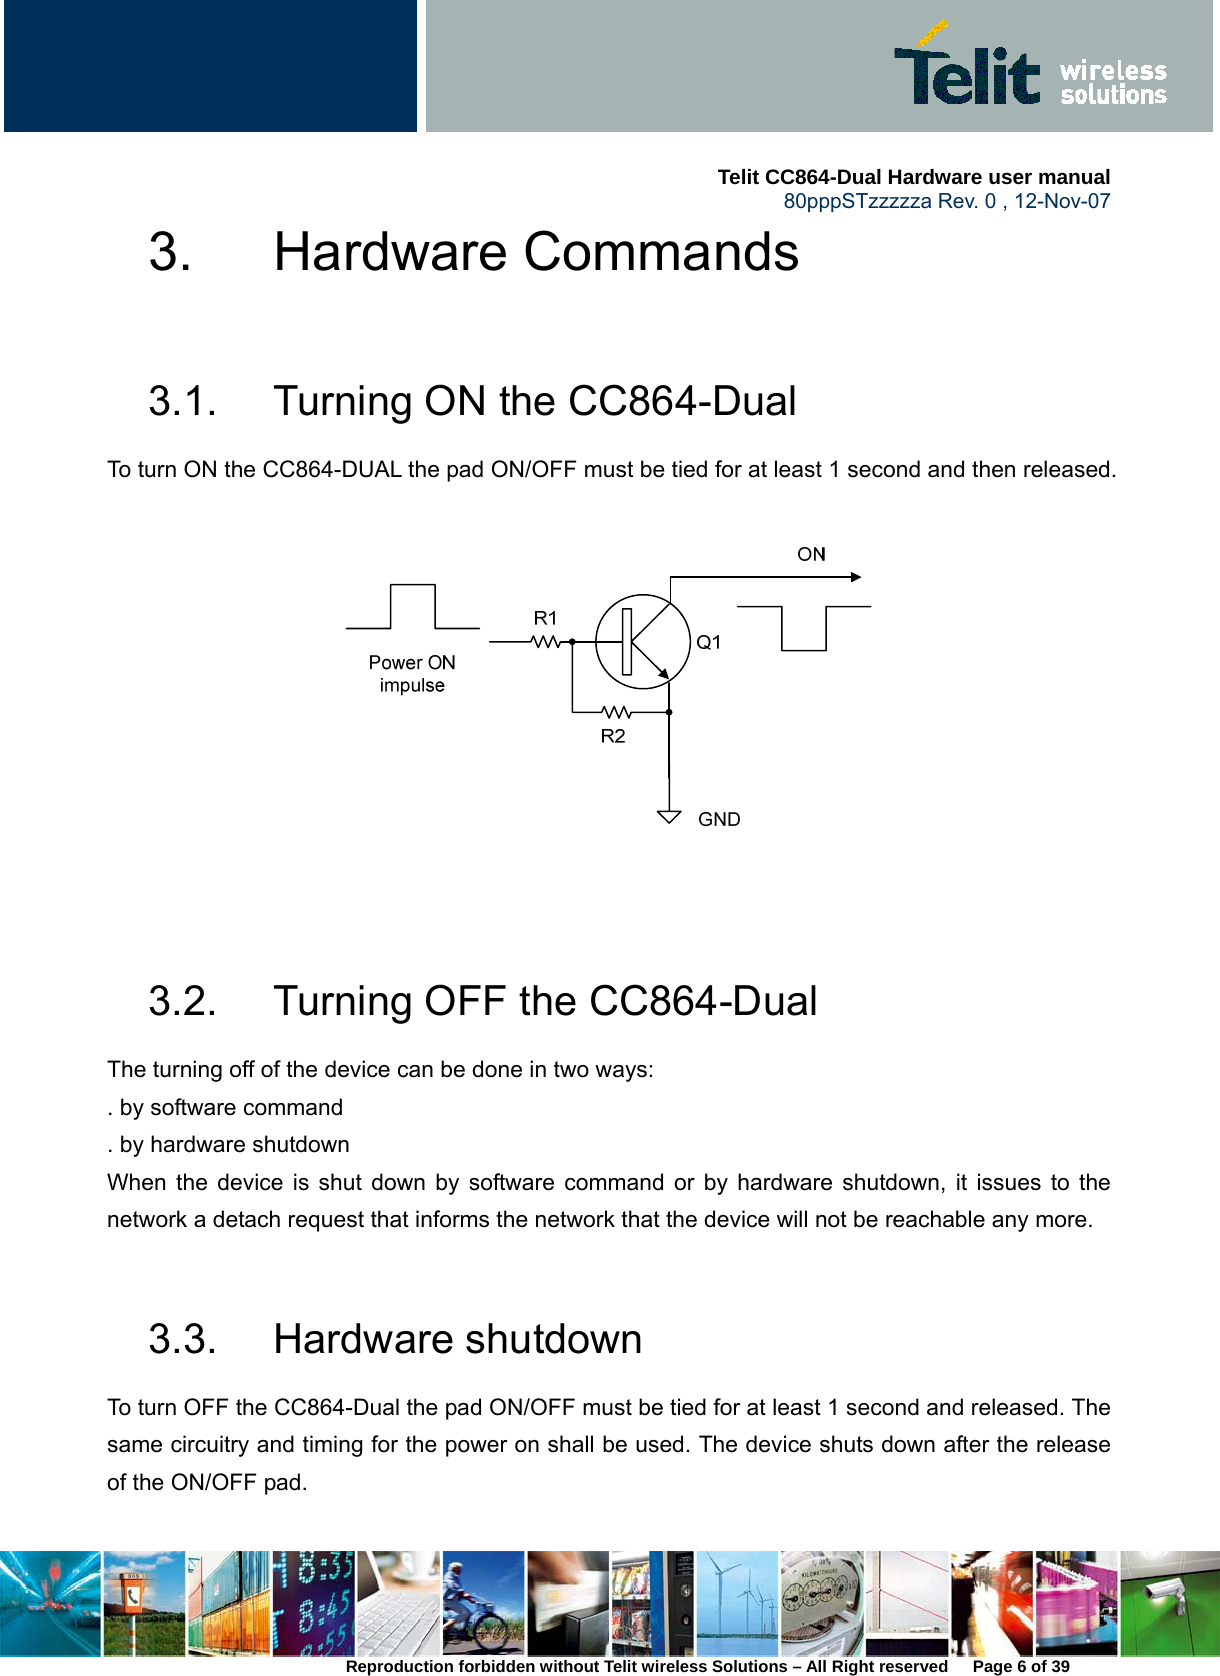     Telit CC864-Dual Hardware user manual   80pppSTzzzzza Rev. 0 , 12-Nov-07 Reproduction forbidden without Telit wireless Solutions – All Right reserved      Page 6 of 39 3. Hardware Commands  3.1.  Turning ON the CC864-Dual To turn ON the CC864-DUAL the pad ON/OFF must be tied for at least 1 second and then released.     3.2.  Turning OFF the CC864-Dual The turning off of the device can be done in two ways: . by software command . by hardware shutdown When the device is shut down by software command or by hardware shutdown, it issues to the network a detach request that informs the network that the device will not be reachable any more.    3.3. Hardware shutdown To turn OFF the CC864-Dual the pad ON/OFF must be tied for at least 1 second and released. The same circuitry and timing for the power on shall be used. The device shuts down after the release of the ON/OFF pad.    